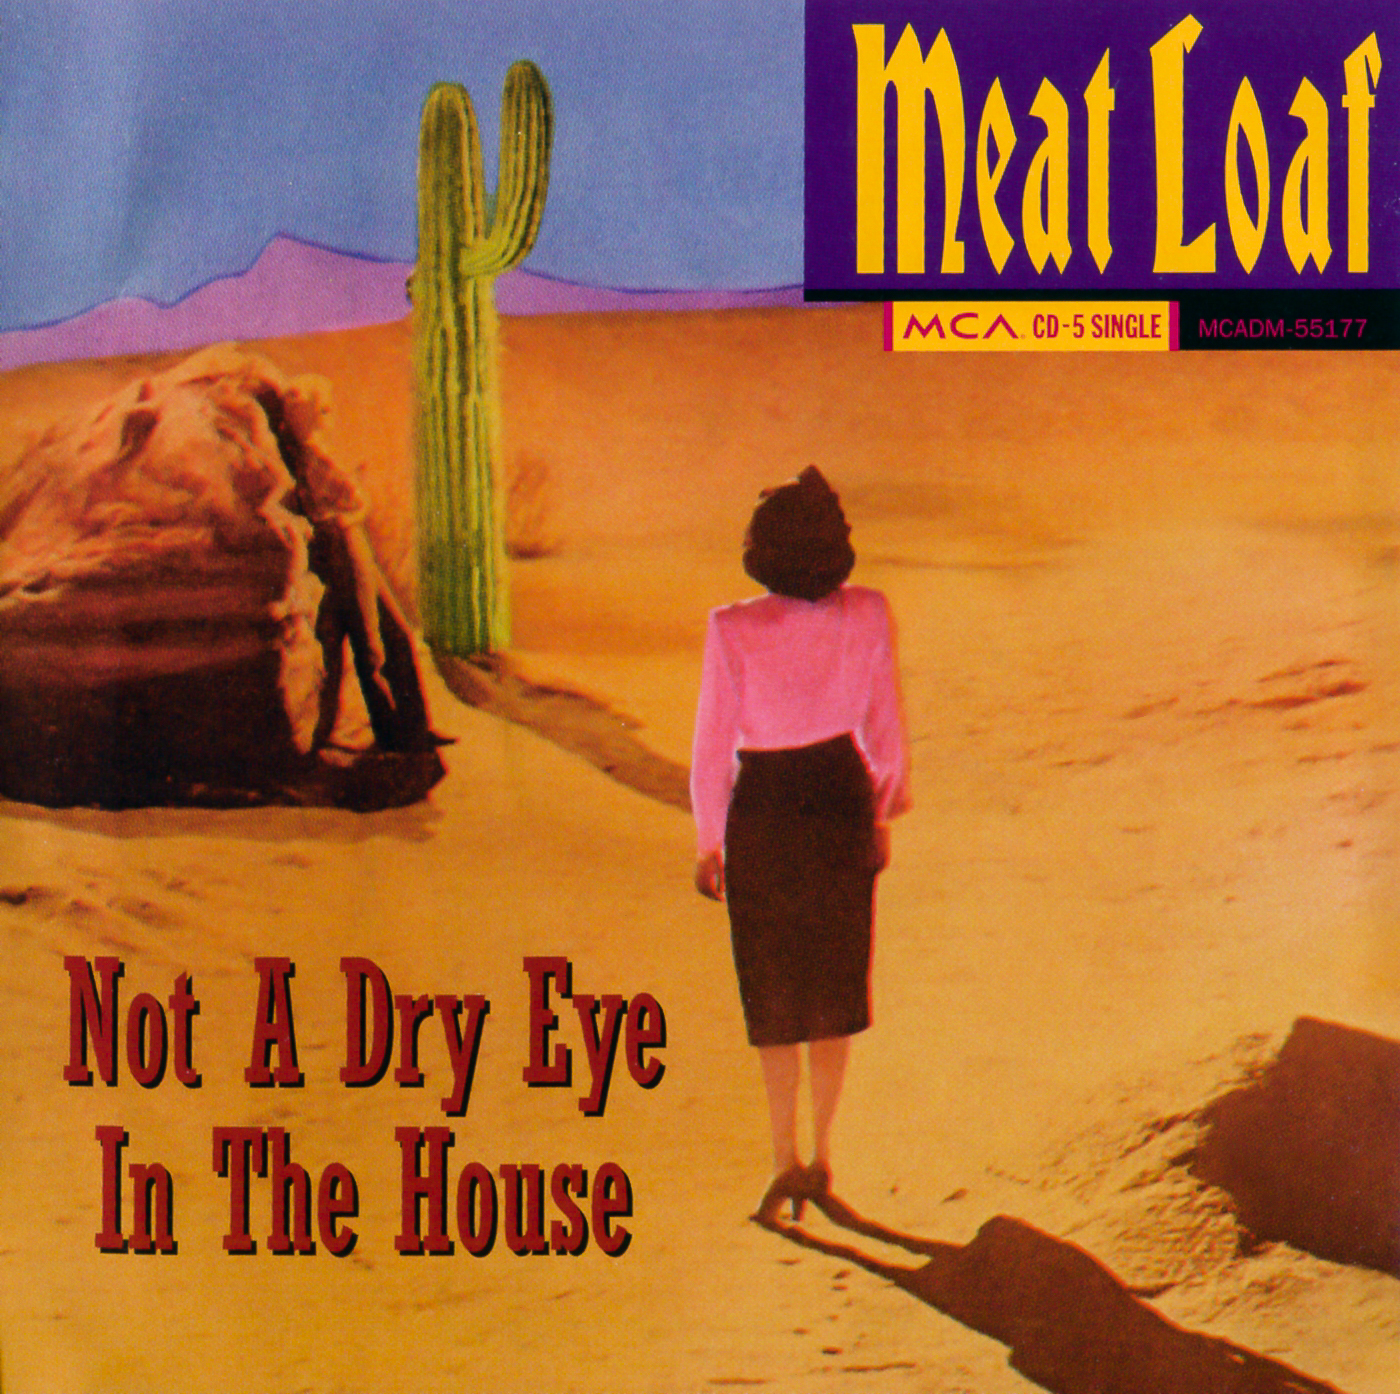 NOT A DRY EYE IN THE HOUSE cover art